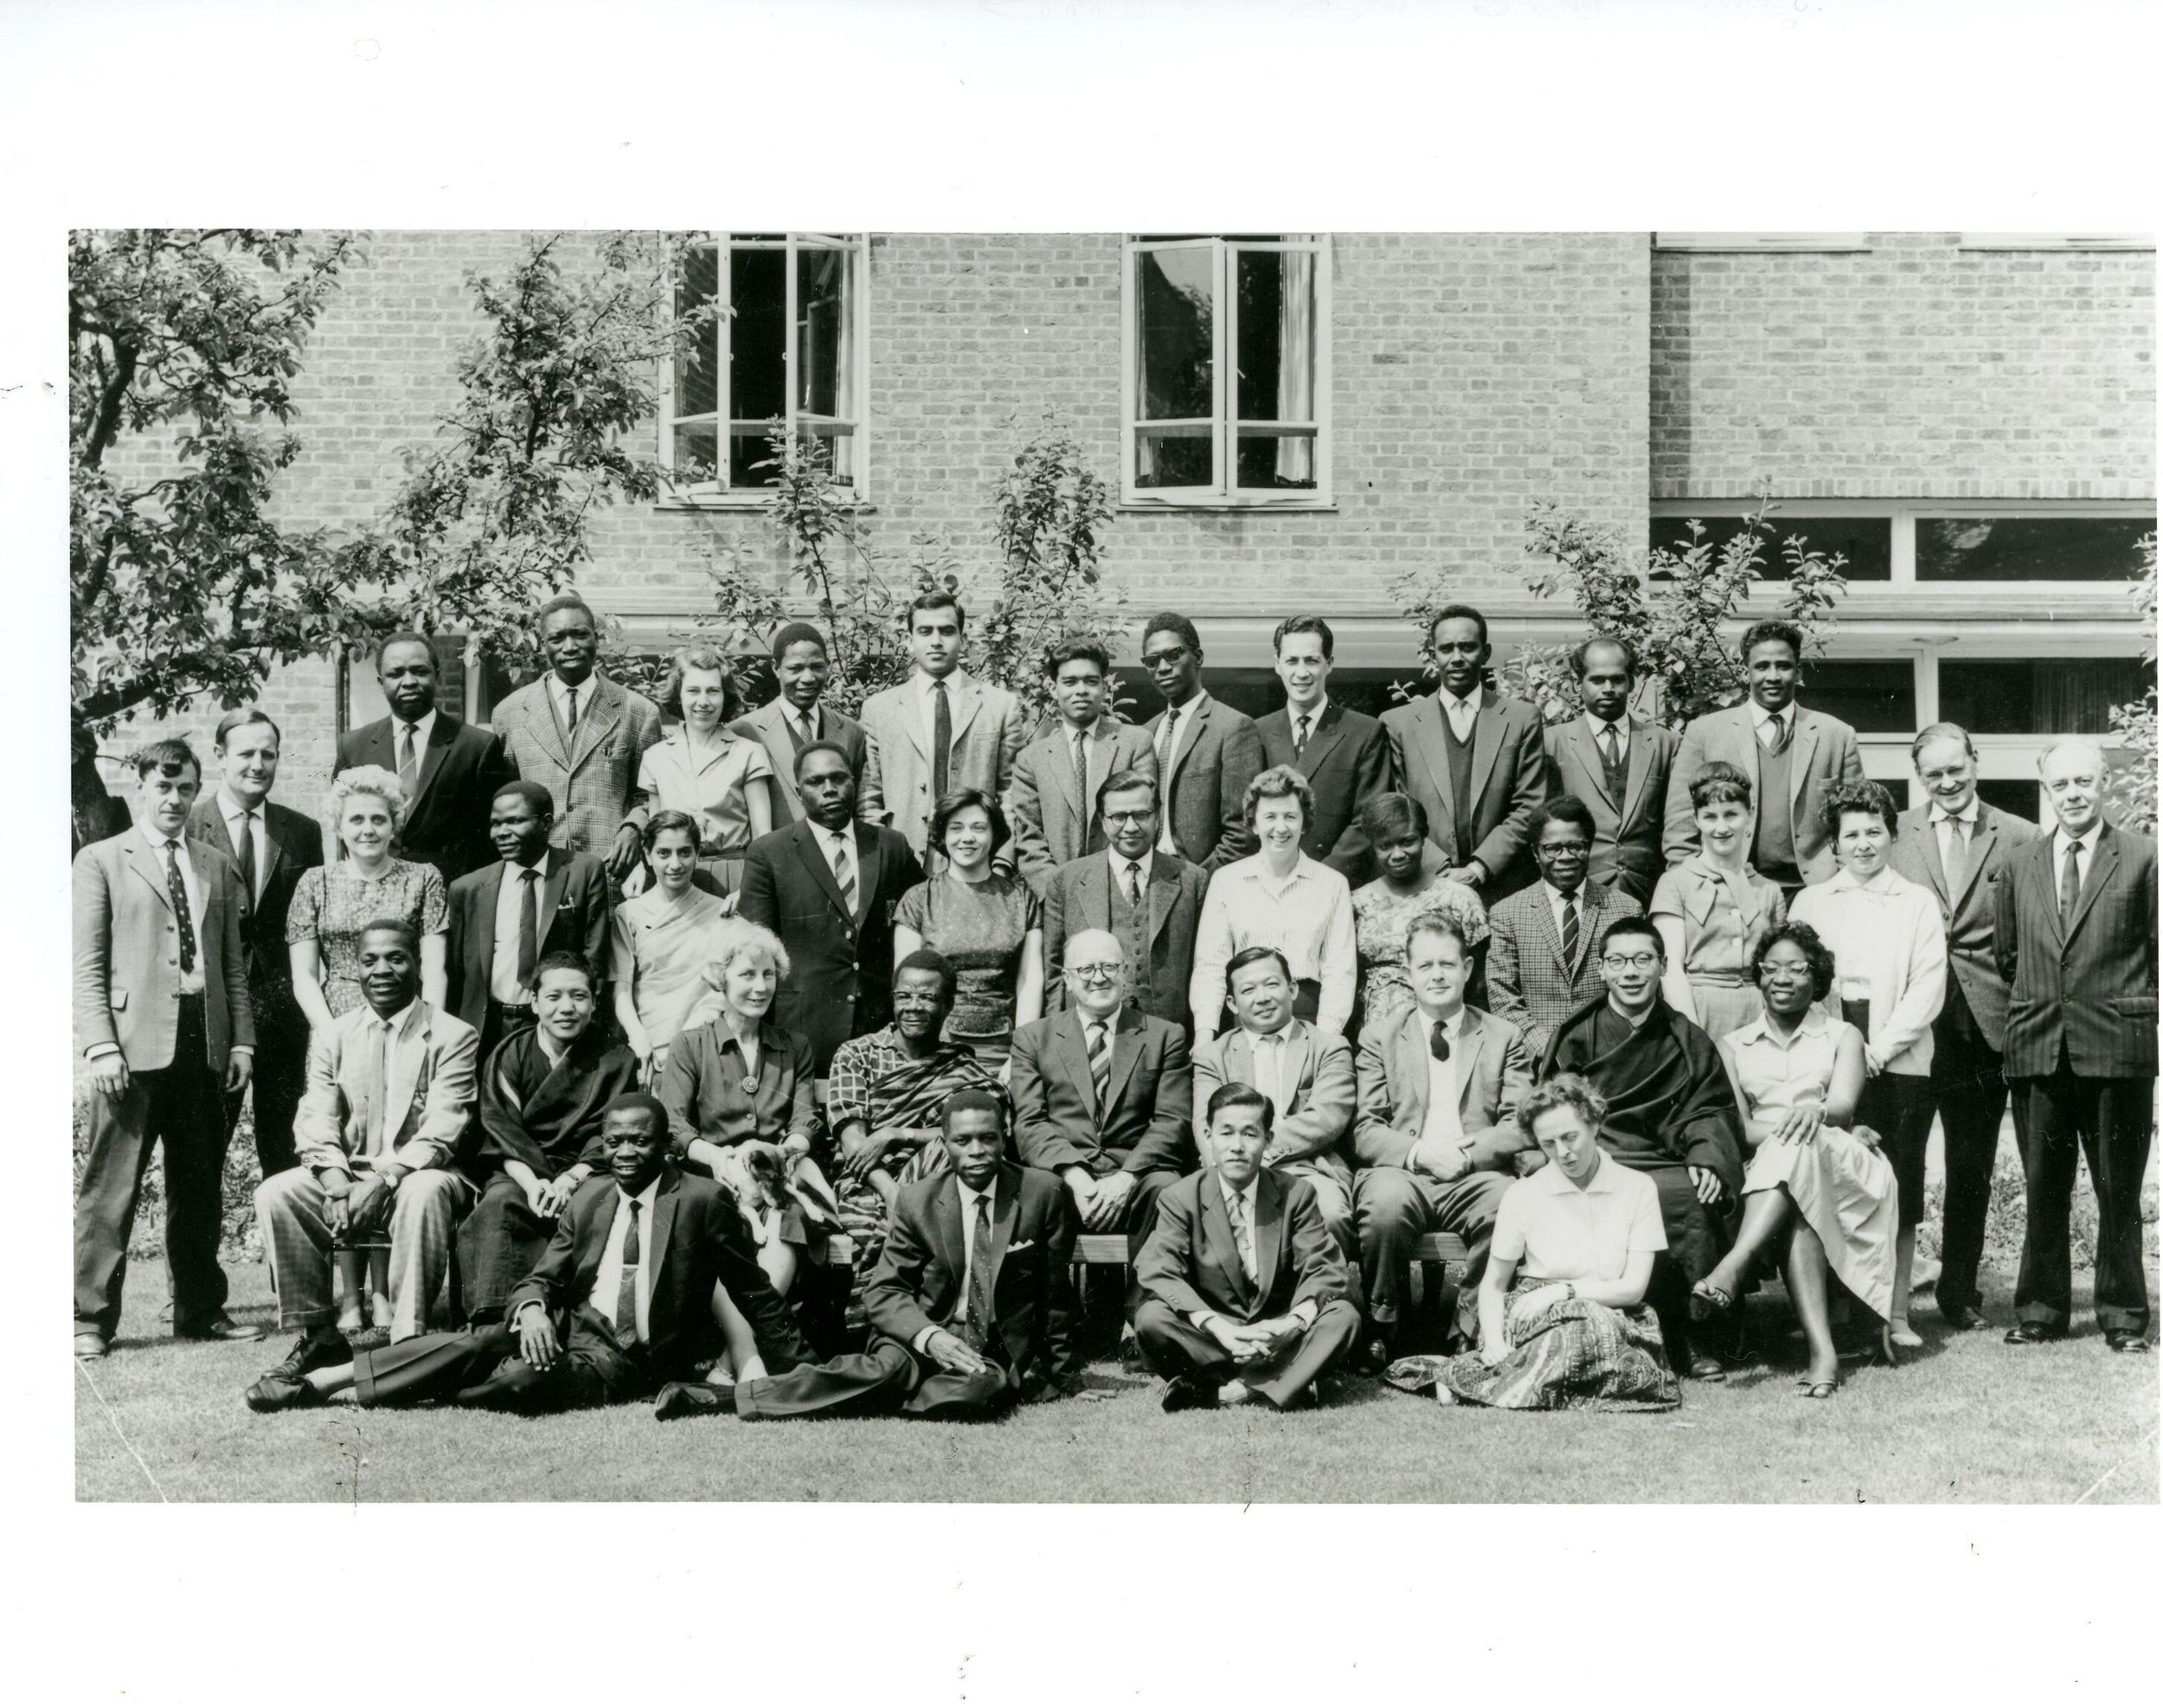 Chogyam Trungpa, Oxford (seated, 2nd from right)